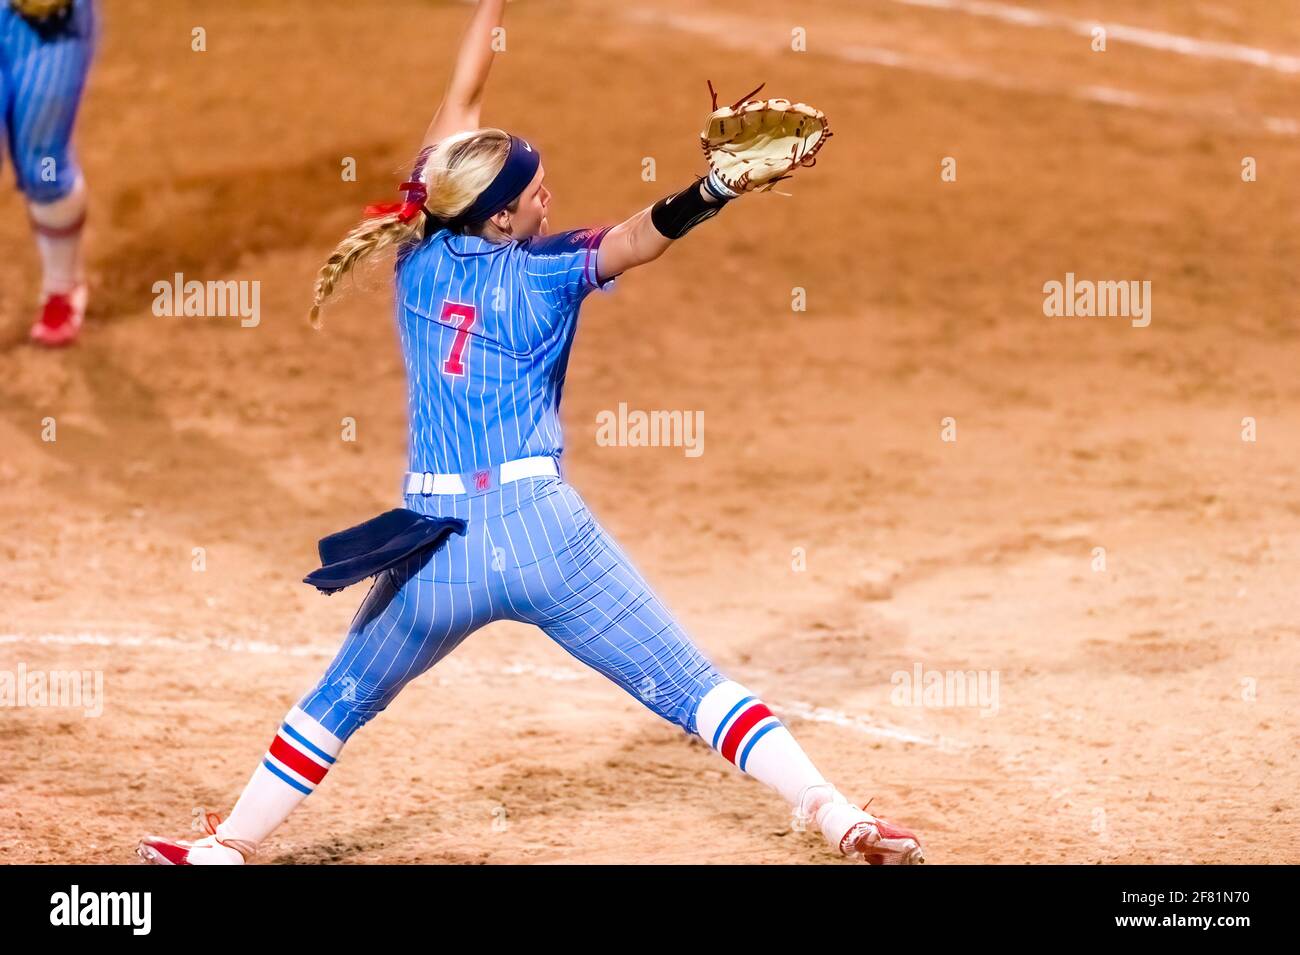 The Ole Miss Rebel Pitcher Is Winding Up To Make a Pitch To Home Plate Stock Photo